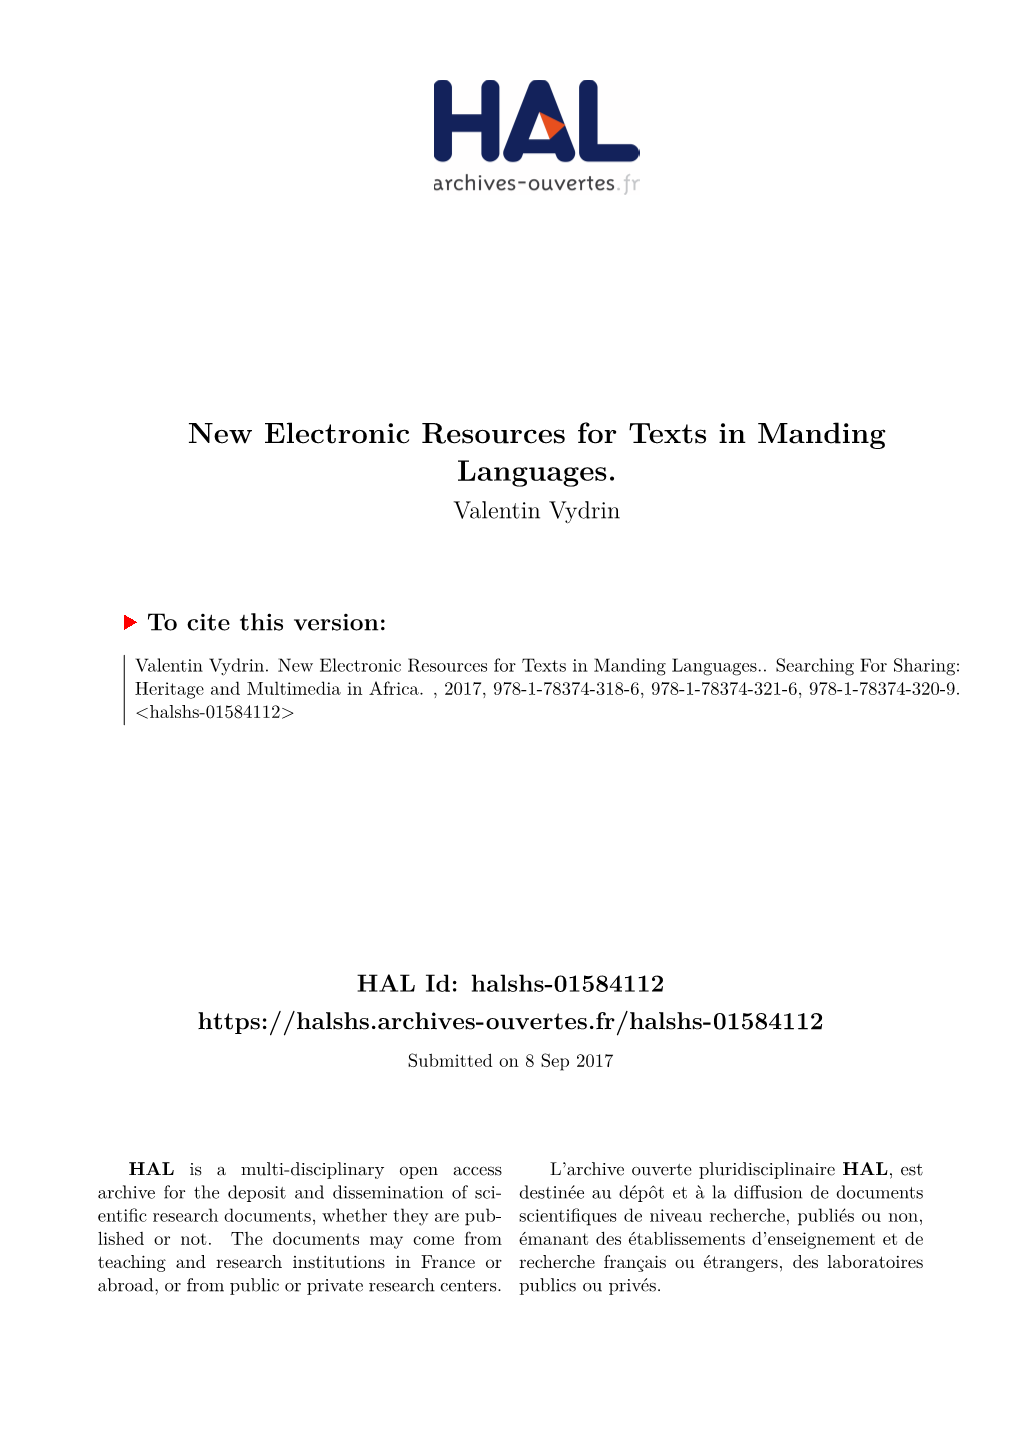 New Electronic Resources for Texts in Manding Languages. Valentin Vydrin